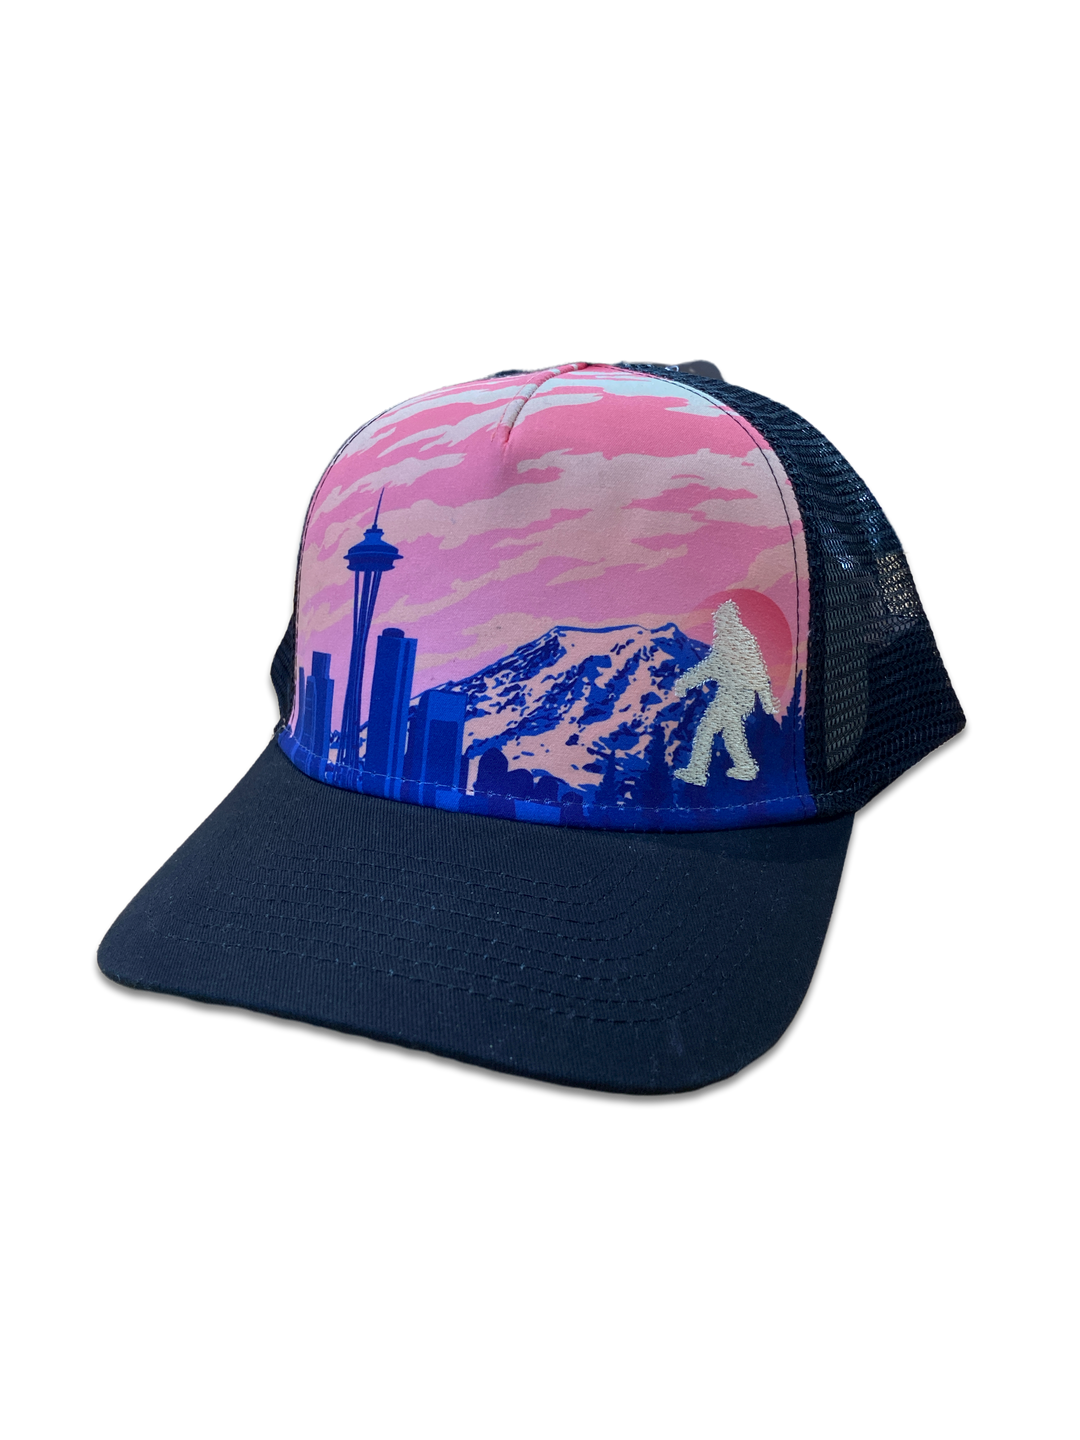 Seattle 5 Panel Sublimated Hat